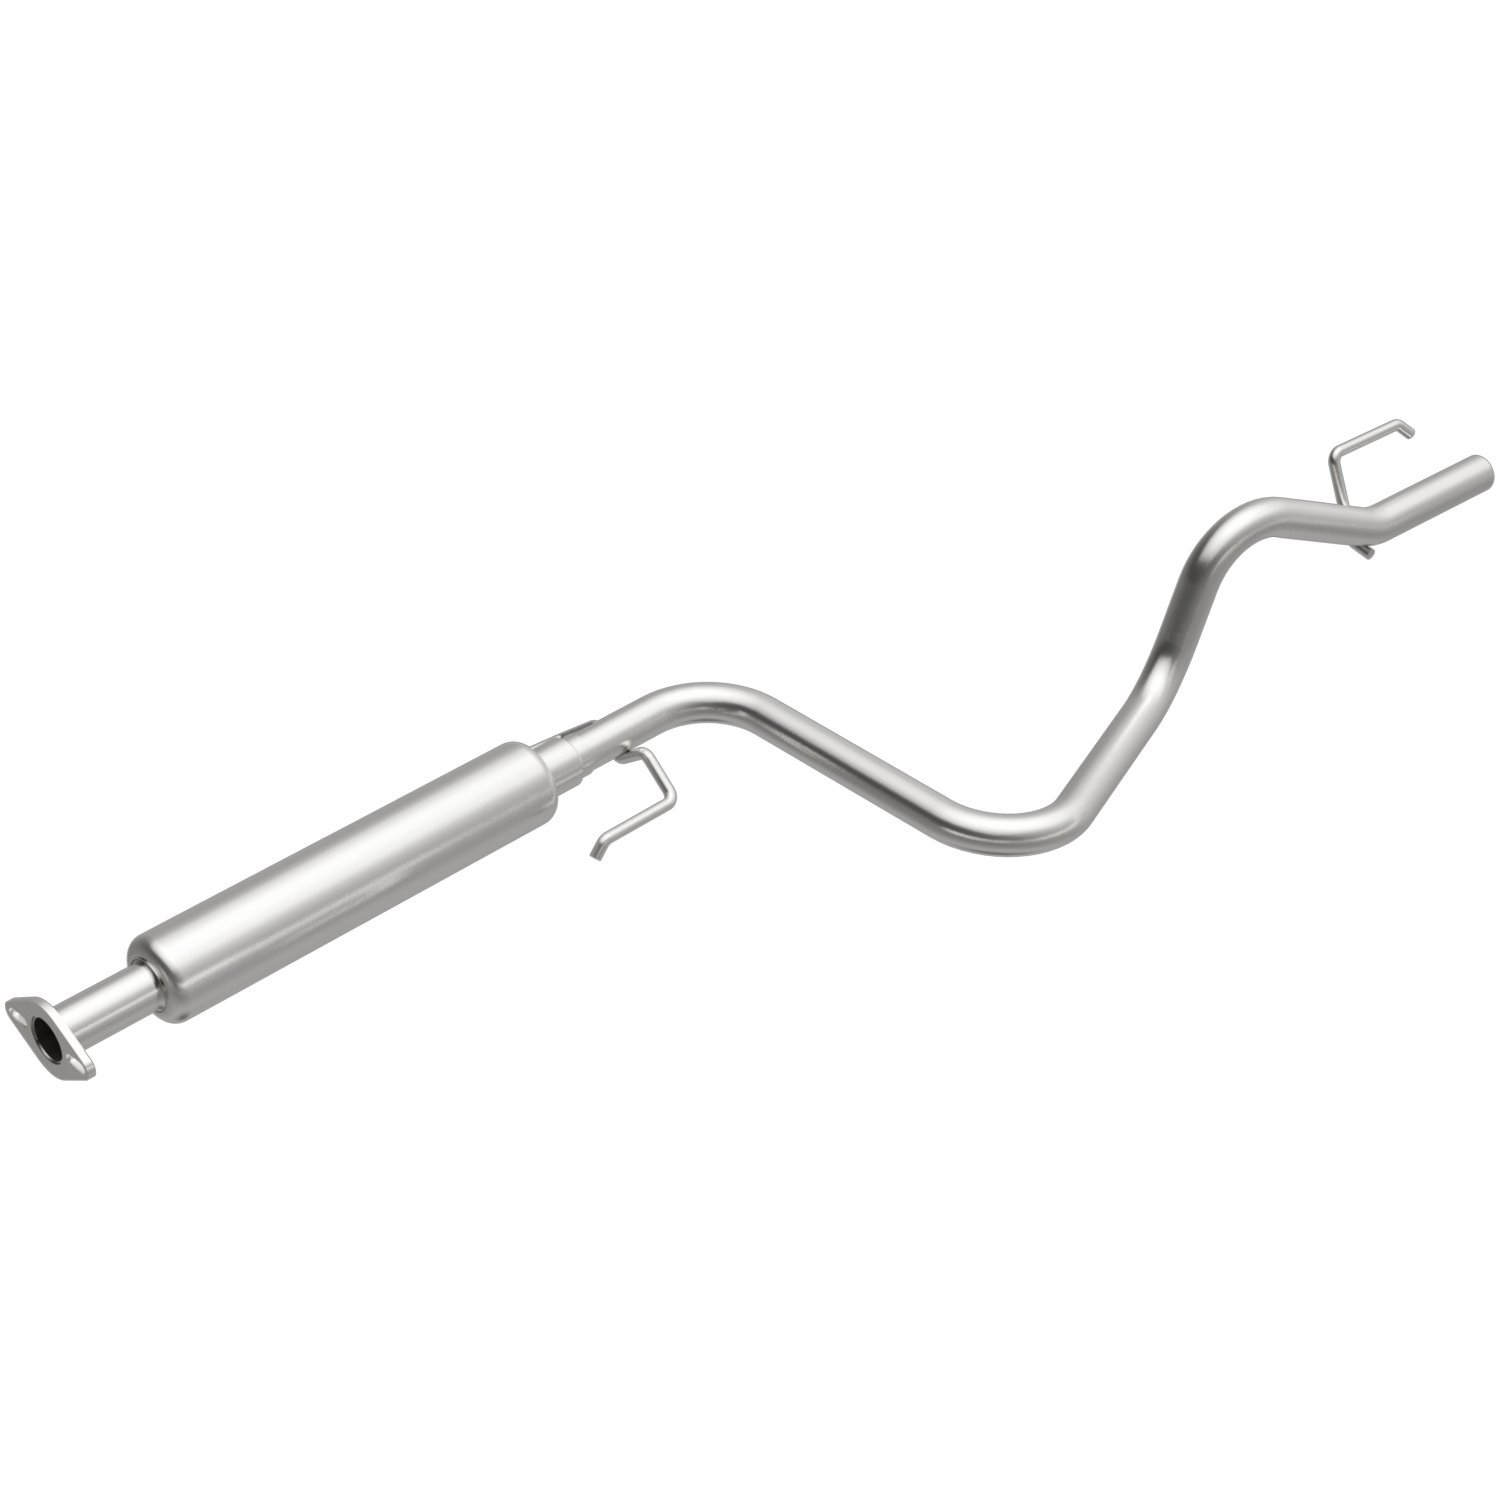 Direct-Fit Exhaust Resonator, 2005-2007 Saturn Ion